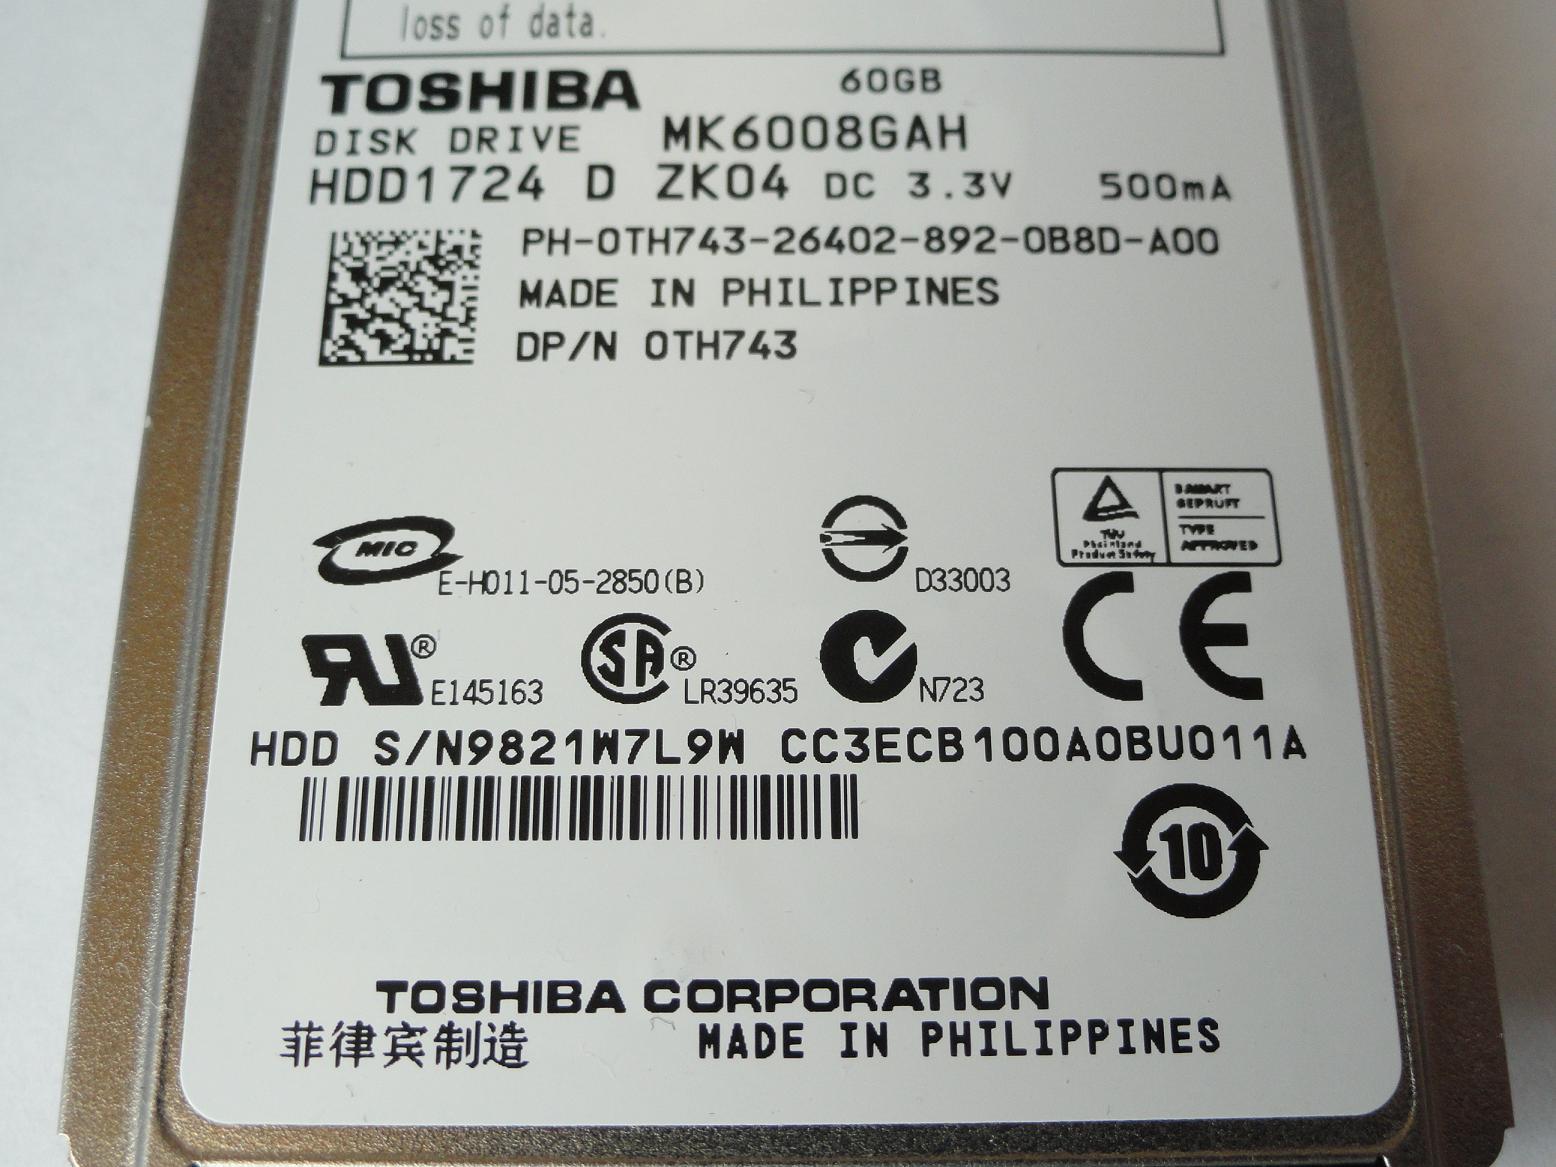 PR23018_HDD1724_Toshiba Dell 60Gb ZIF 4200rpm 1.8in HDD - Image3